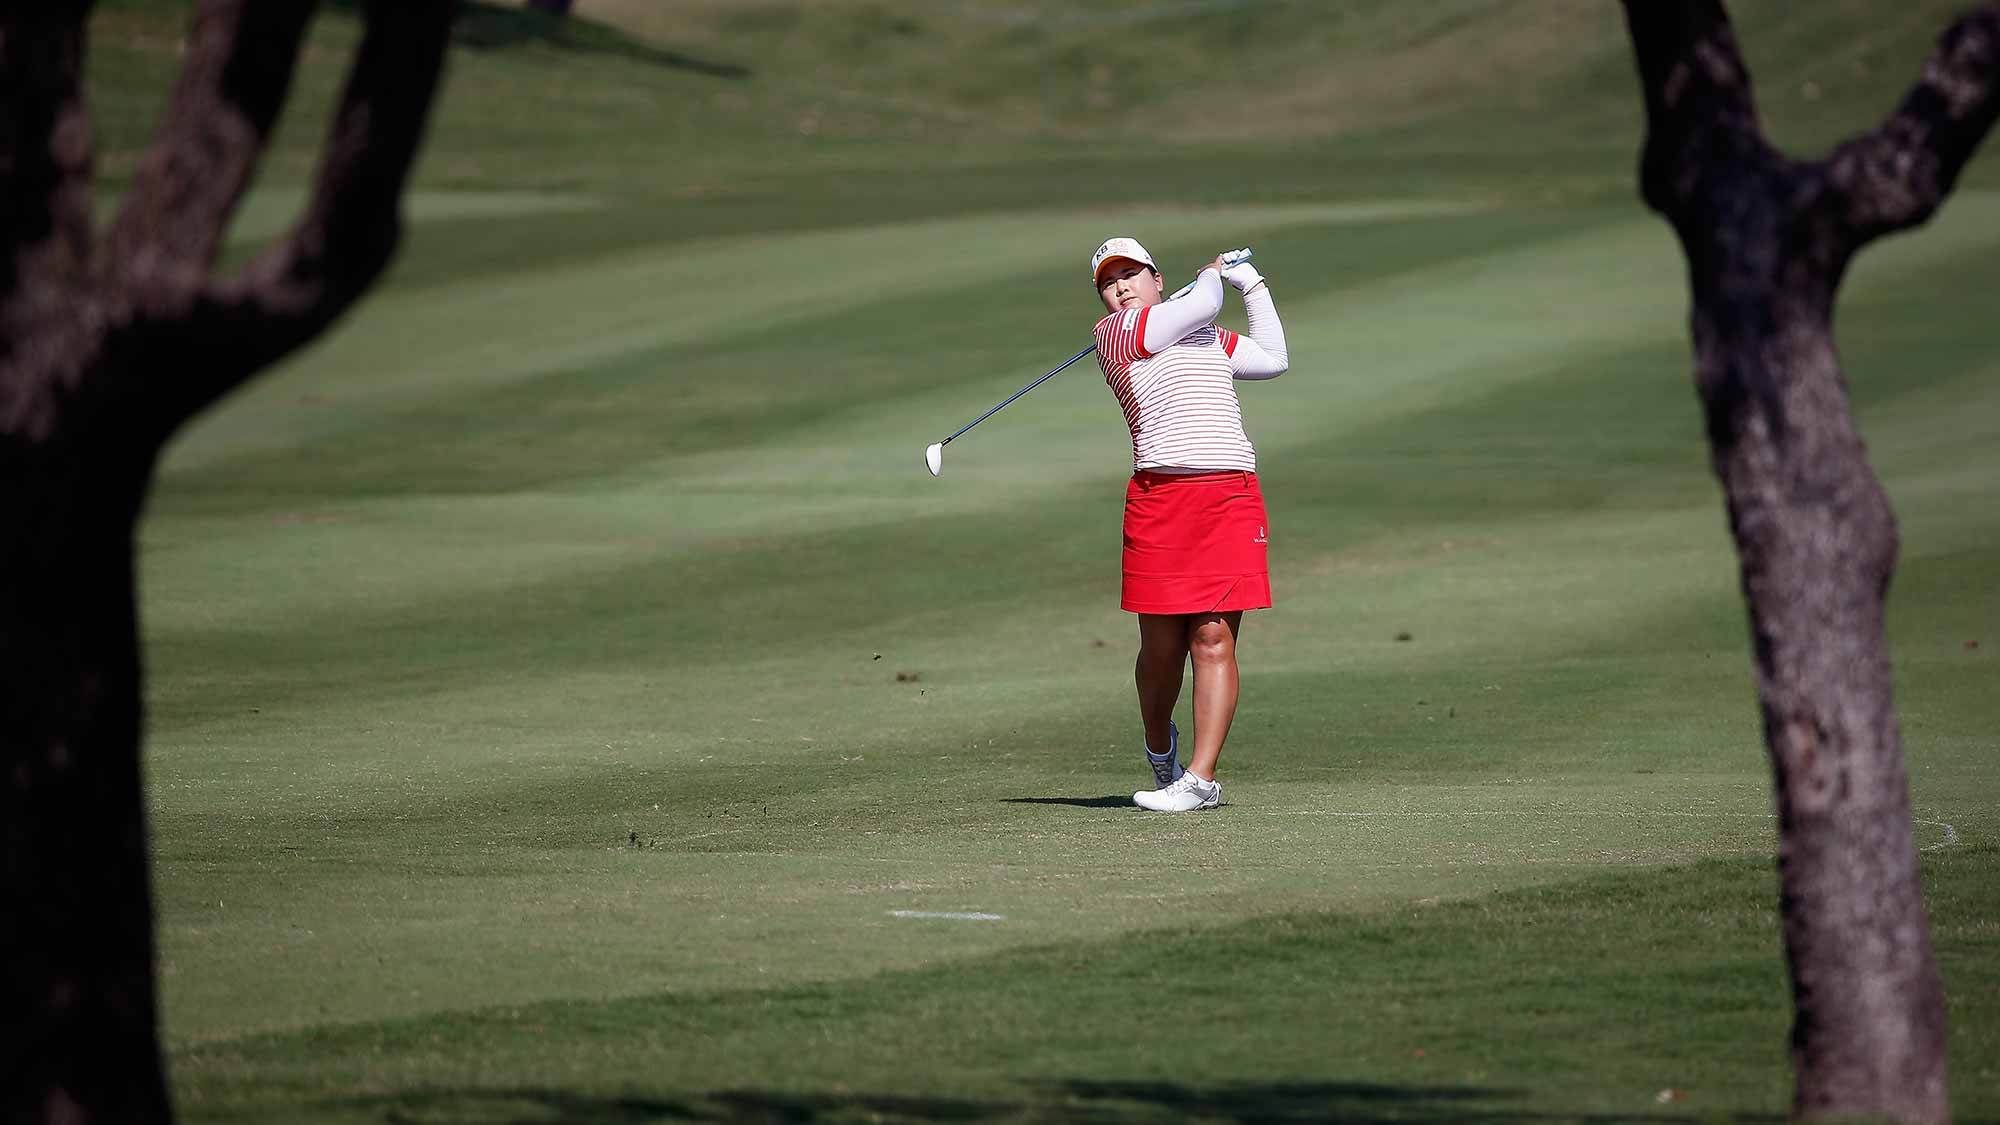 Inbee Park of South Korea hits a shot on the 10th hole during Round Two of the 2015 Volunteers of America North Texas Shootout Presented